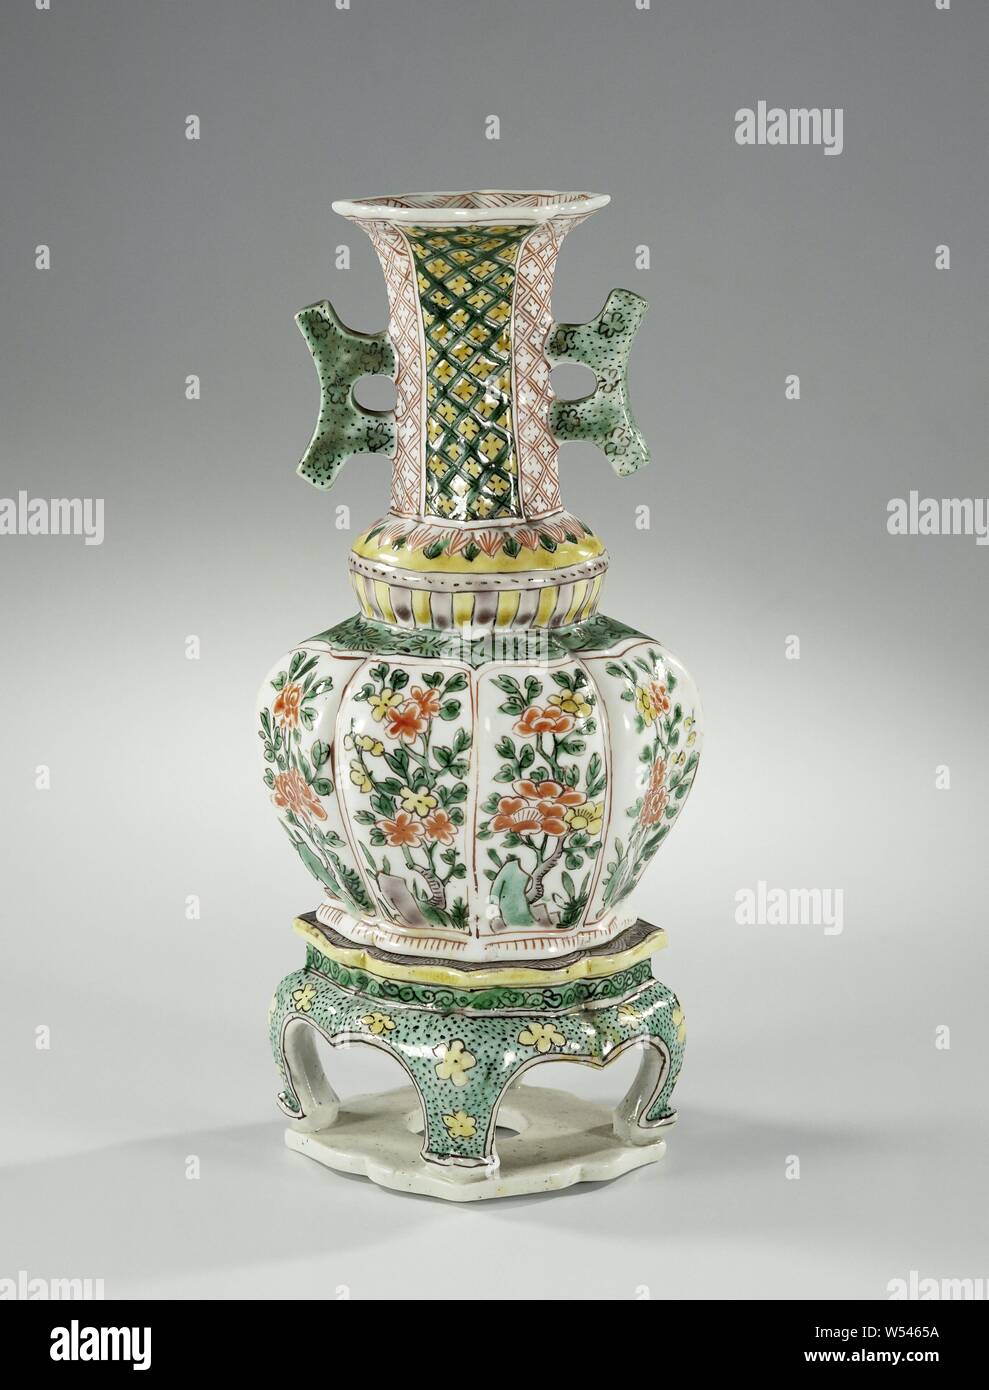 Octagonal vase with two handles, flowering plants and diaper pattern on a separate stand, Octagonal vase of porcelain with two ears standing on the neck, painted on the glaze in red, green, yellow, eggplant and black. The belly is divided into eight compartments with flowering plants near a rock. Above the belly an annular thickening with two bands with leaf motifs. The neck with vertical bands with napkin work. On the ears loose flowers and black dots. The inner edge with a band hatching. The base of the pedestal with yellow flowers and black dots, above it a band with curl. The top Stock Photo